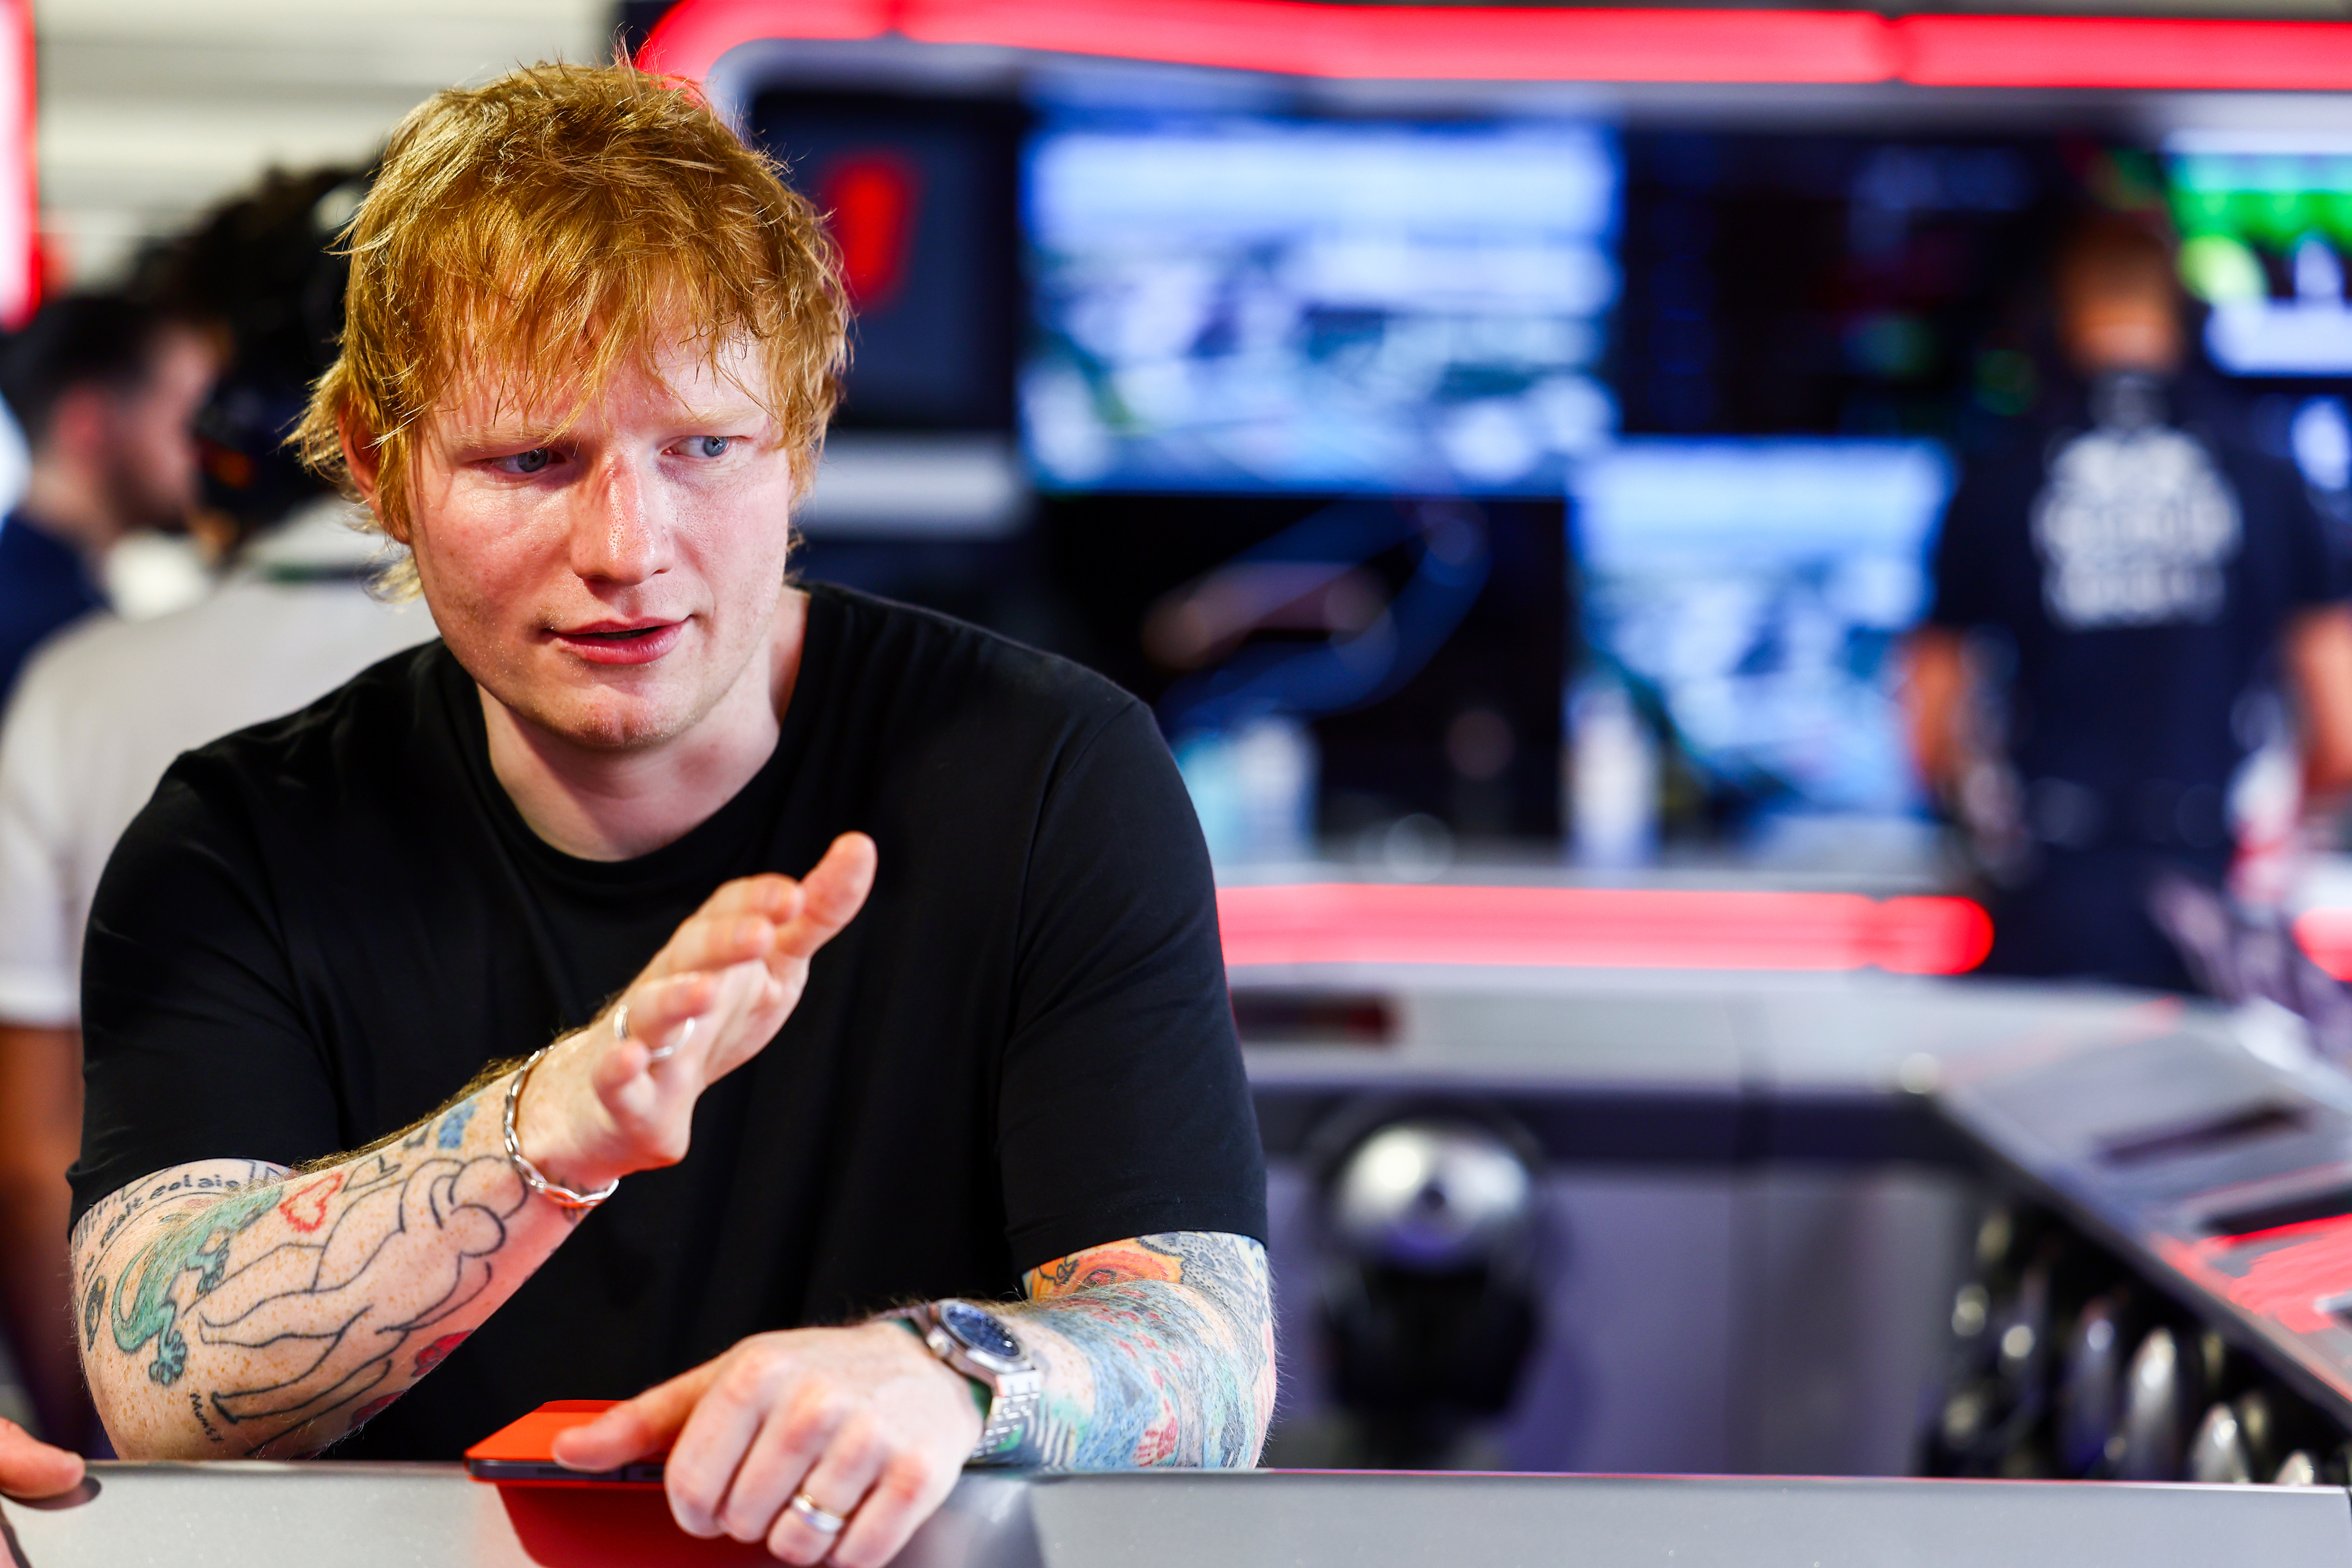 Ed Sheeran gestures while sitting at a console, surrounded by people and screens in the background